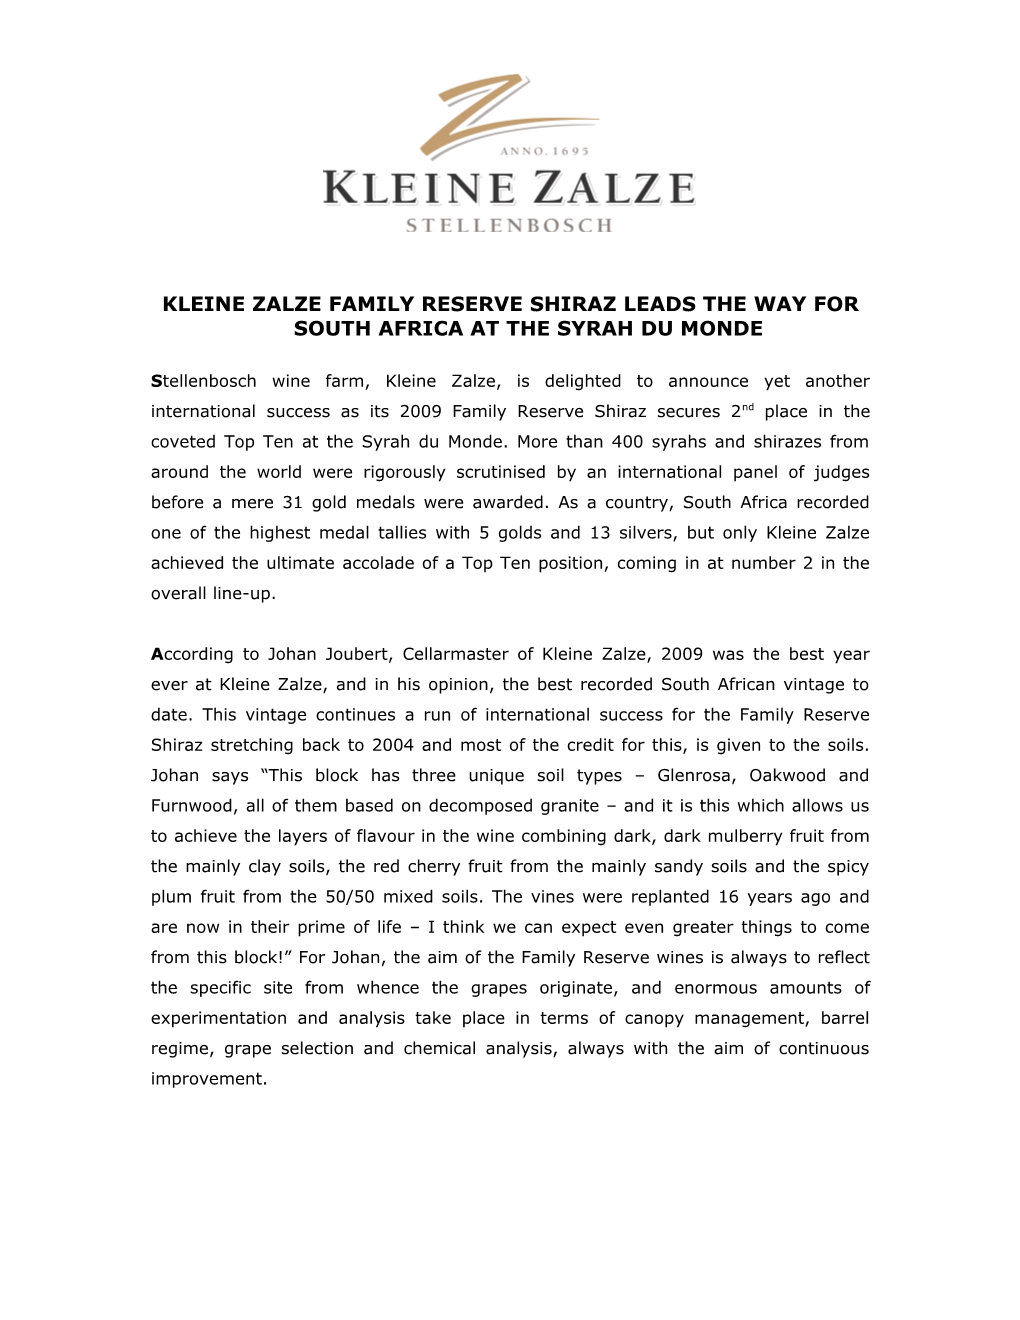 Kleine Zalze Family Reserve Shiraz Leads the Way for South Africa at the Syrah Du Monde